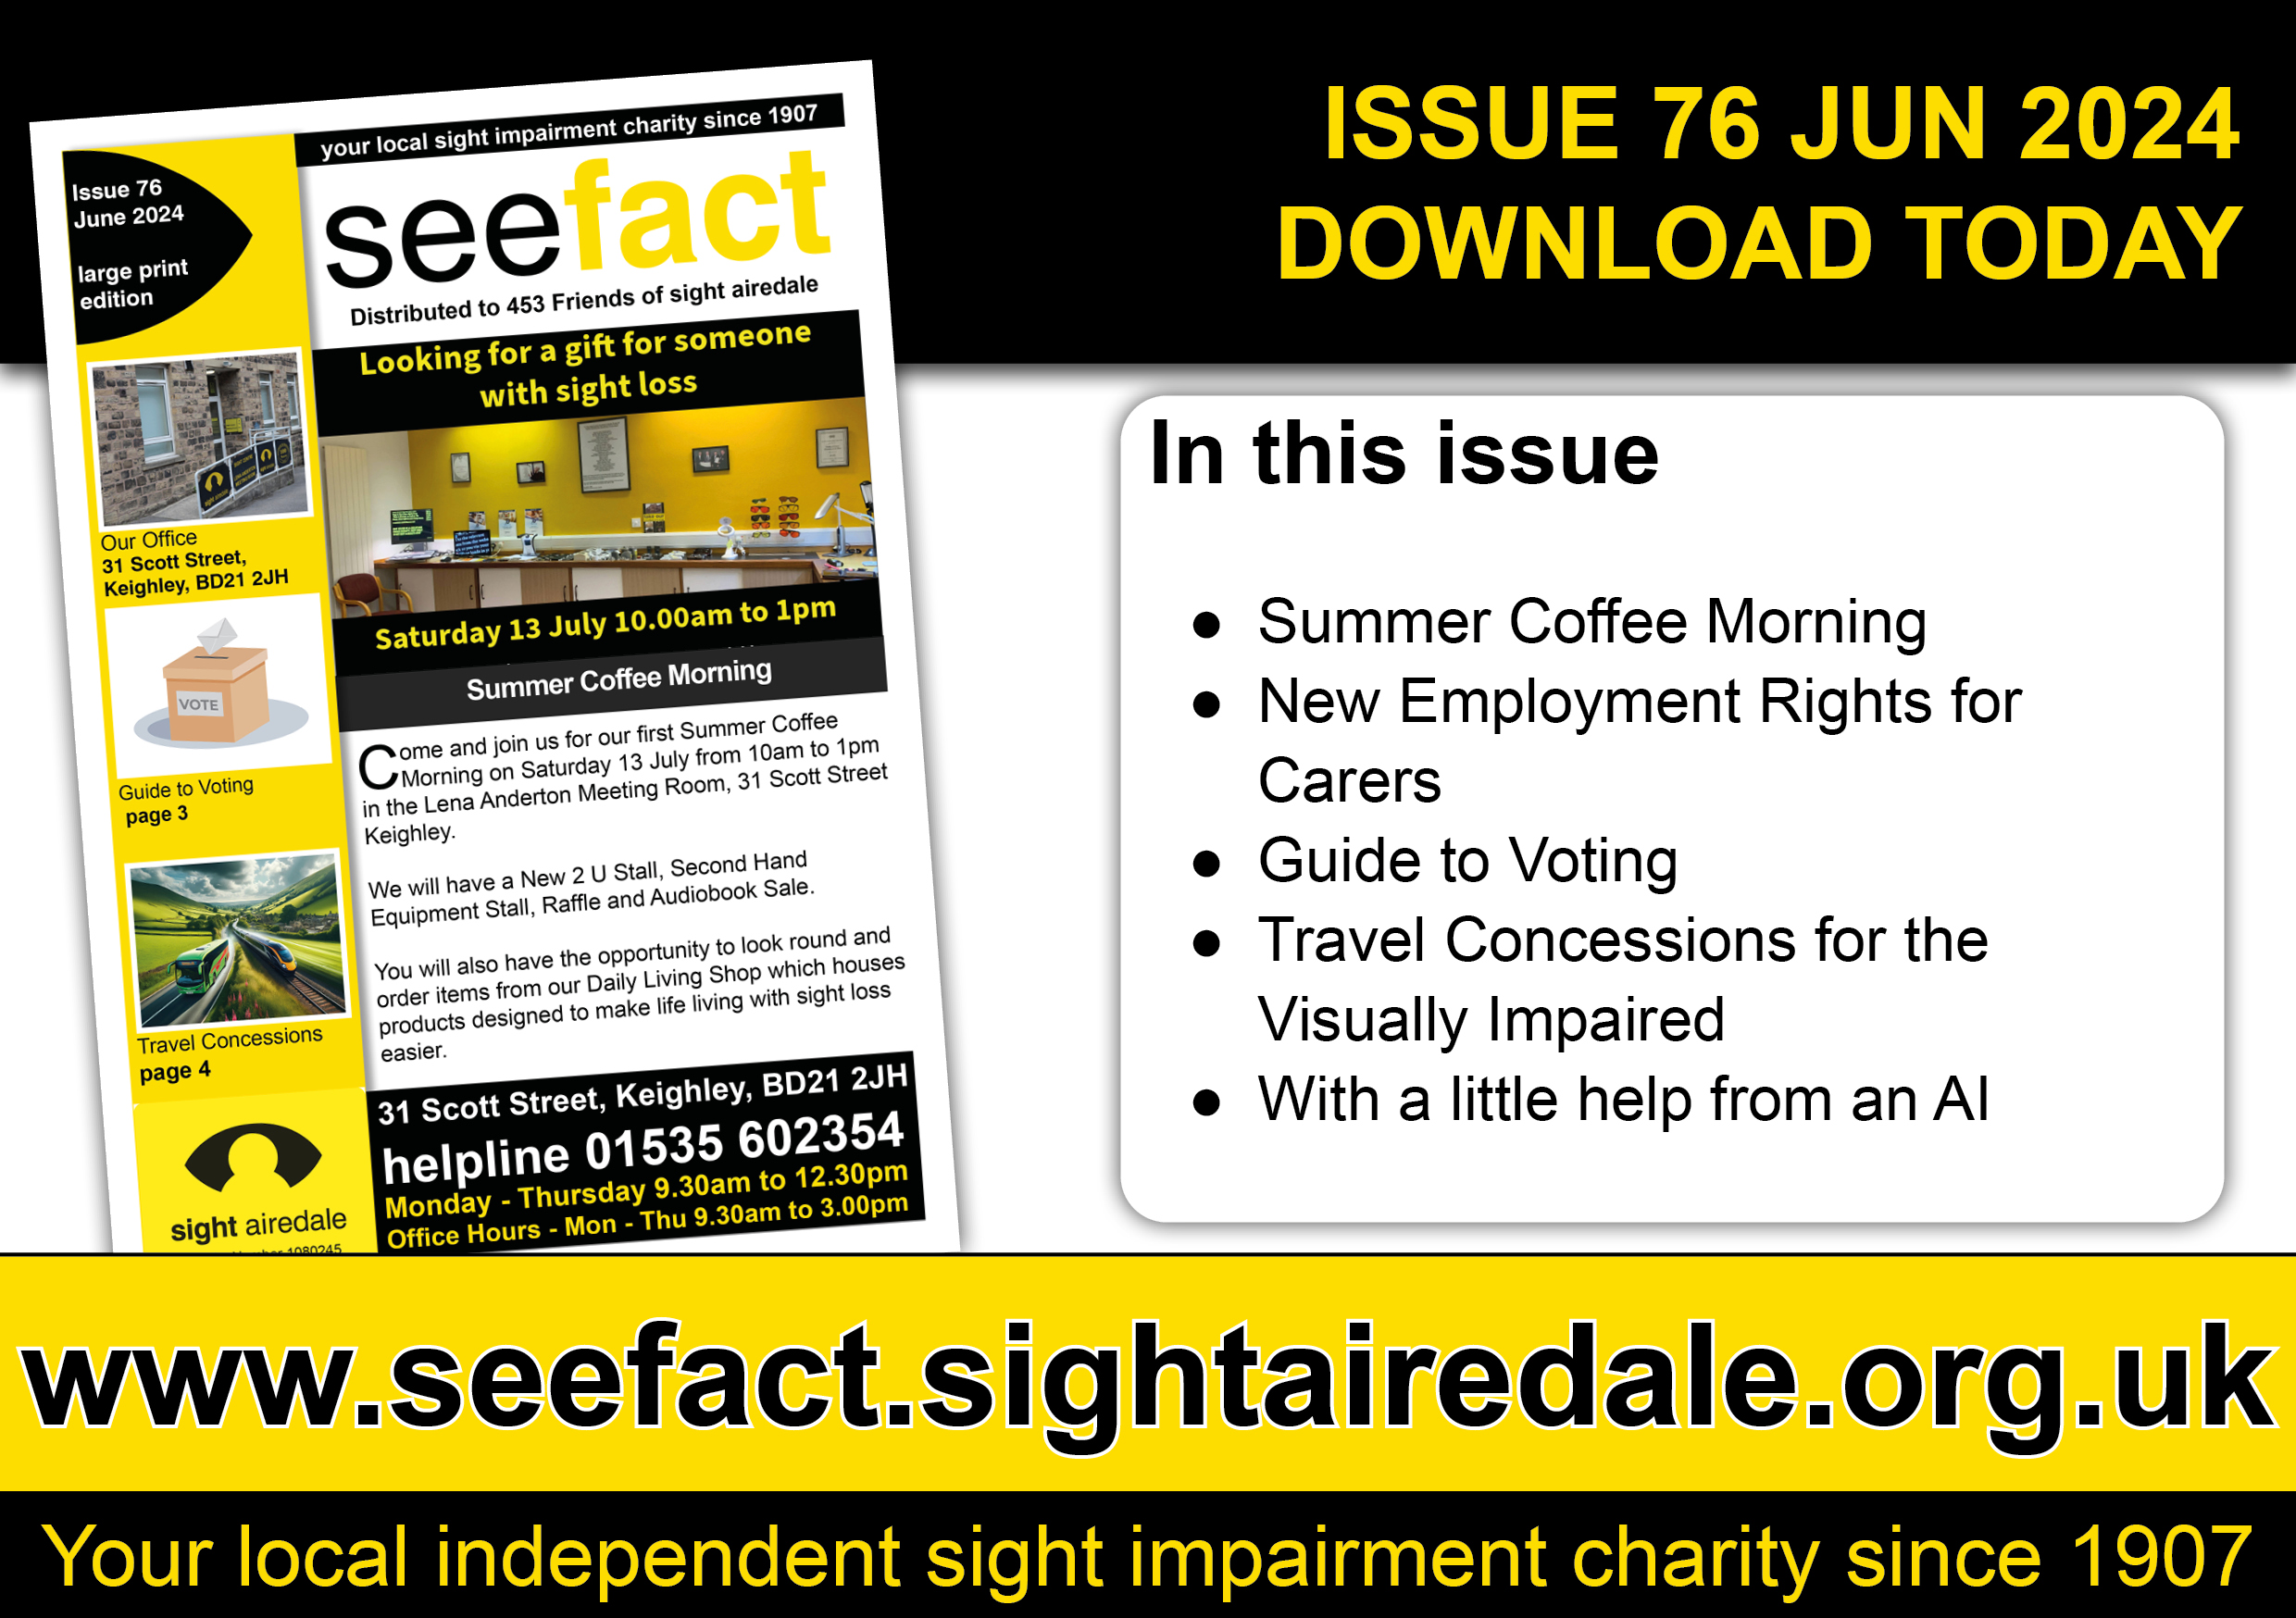 SeeFact June 2024 - In this issue Summer Coffee Morning, New Employment RIghts for Carers, Guide to Voting, Travel Concessions, AI